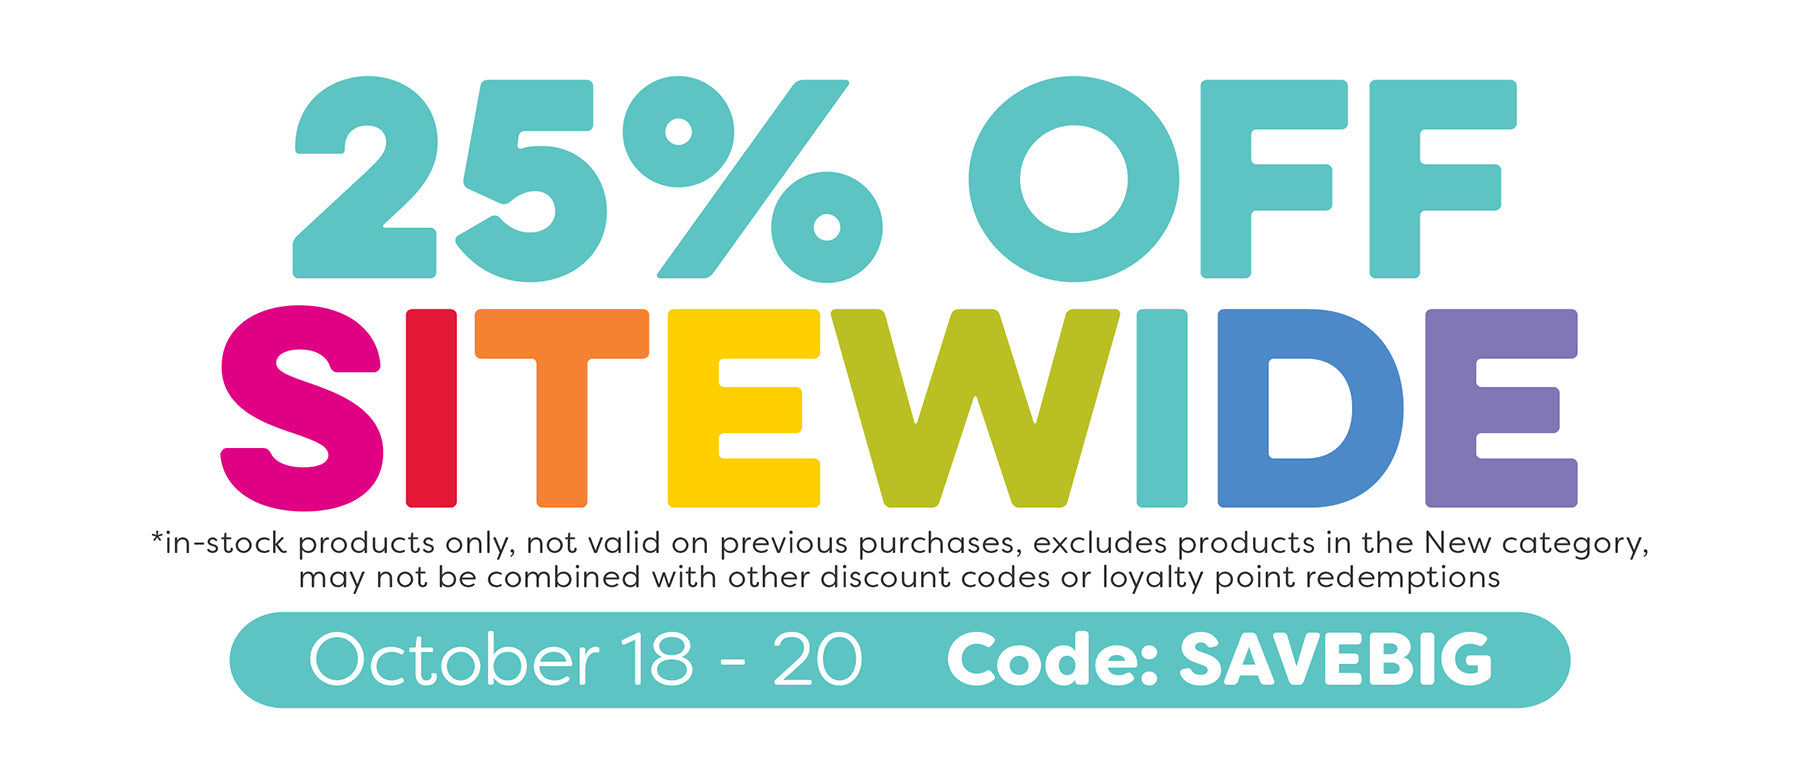 Use code FRIENDS25 for 25% off sitewide until October 15th, make sure